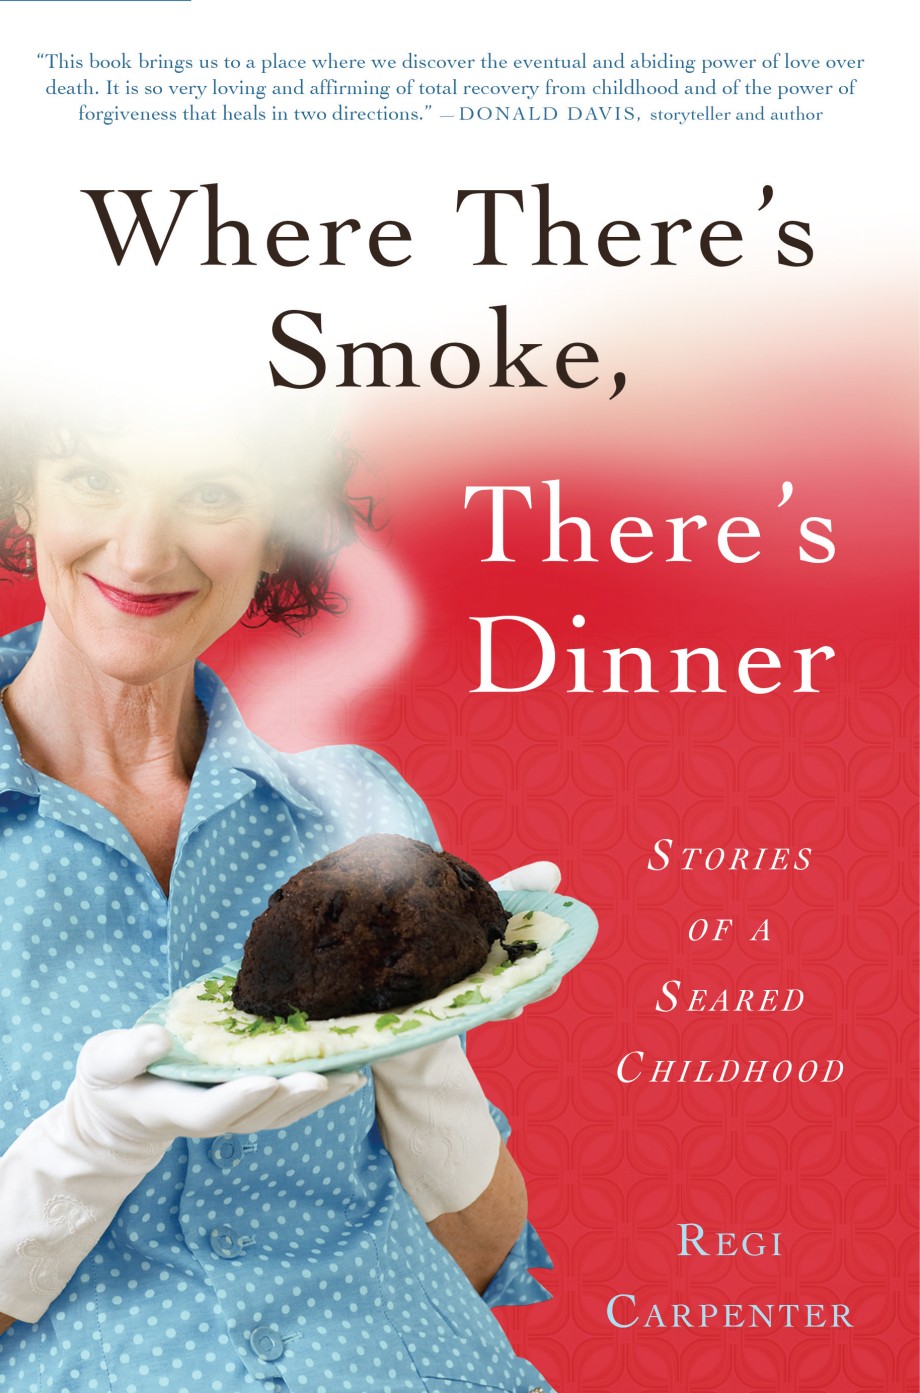 Where There's Smoke, There's Dinner Stories of a Seared Childhood